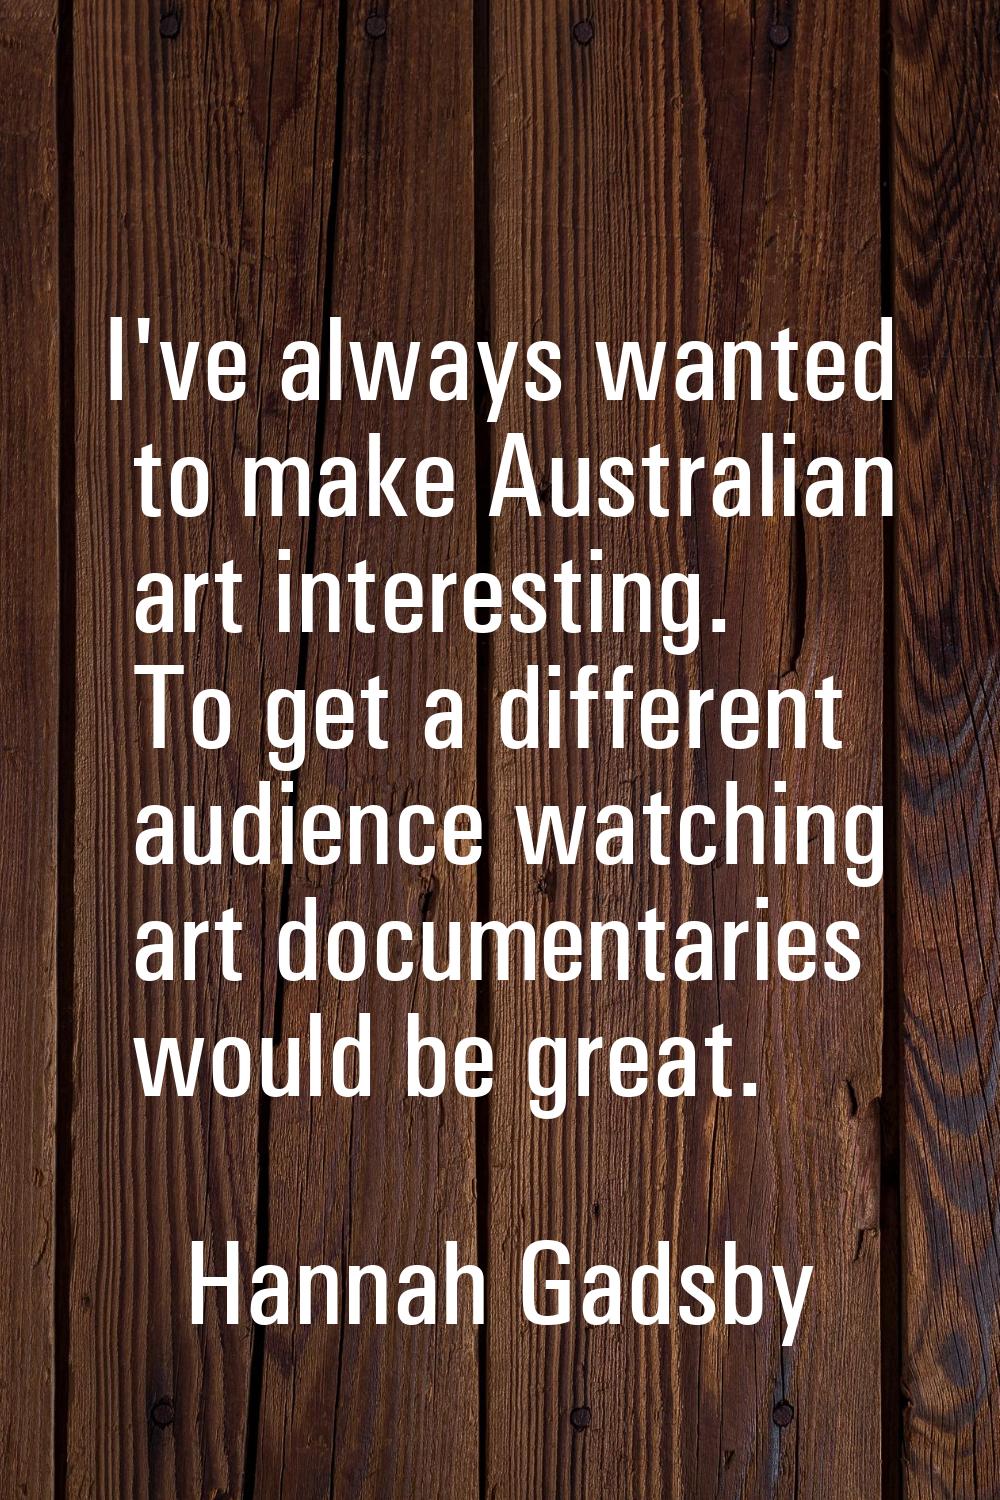 I've always wanted to make Australian art interesting. To get a different audience watching art doc